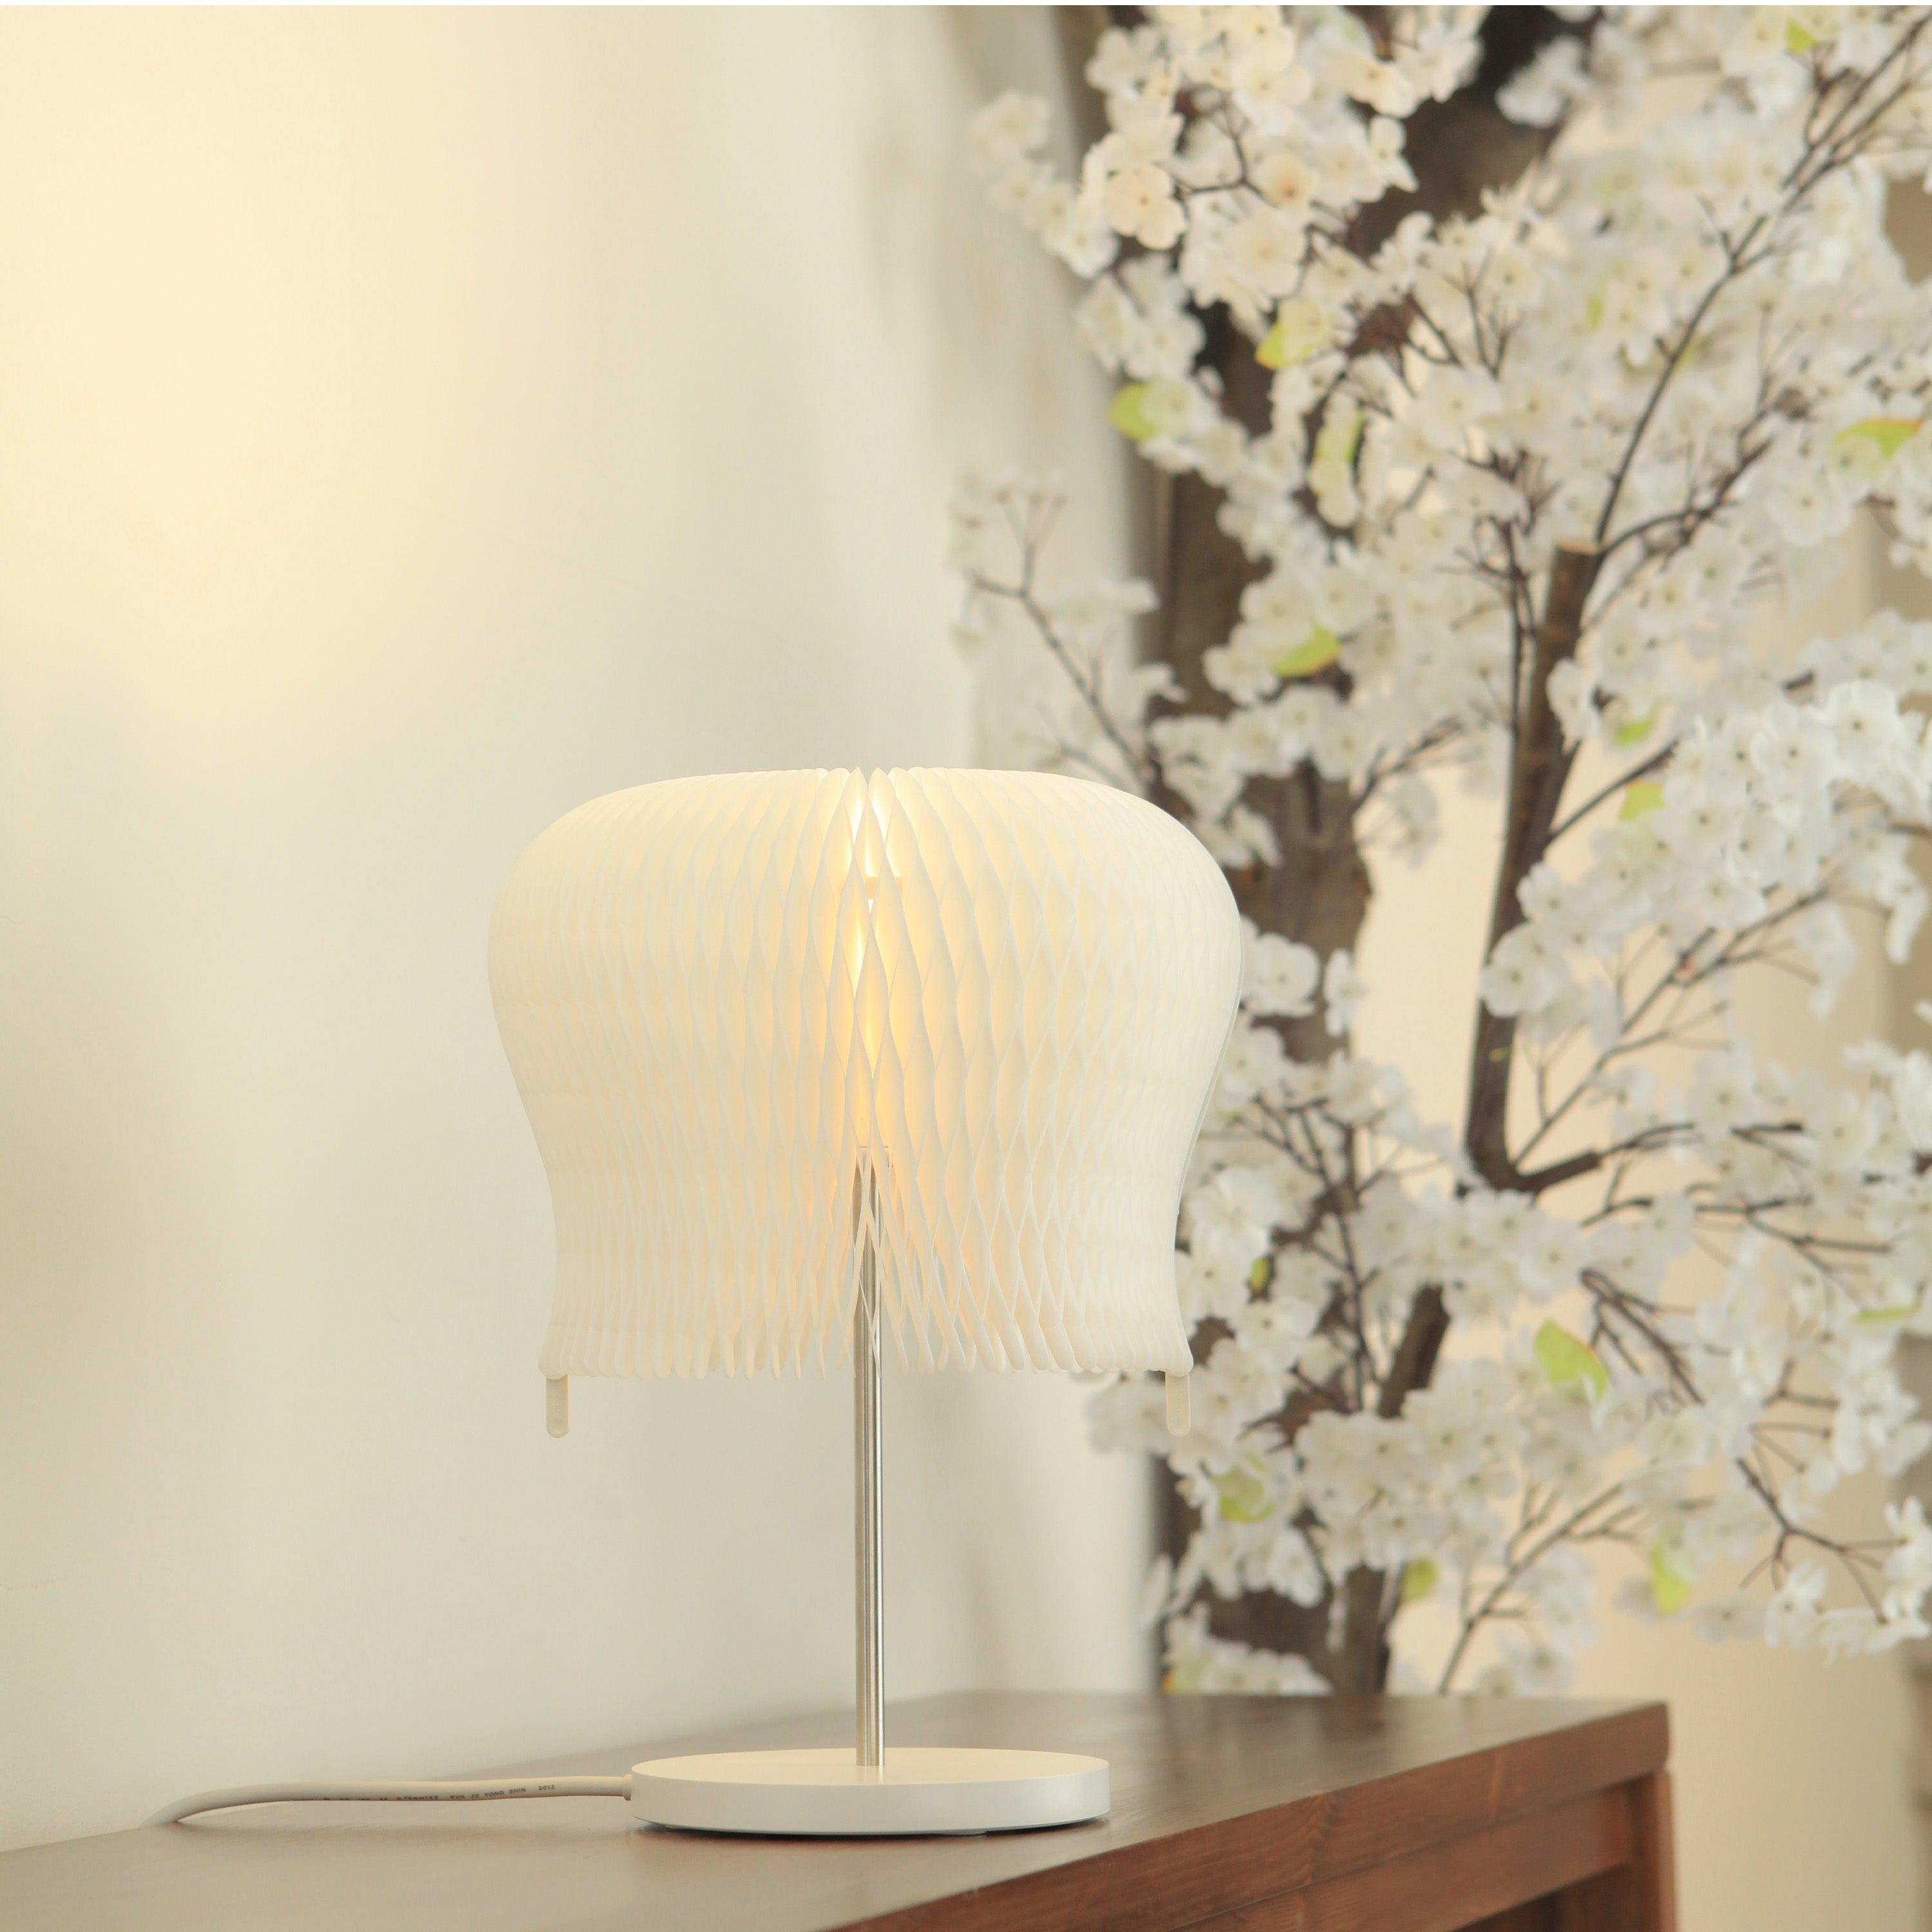 Dlight Transformable Lamp Shade Table Lamp